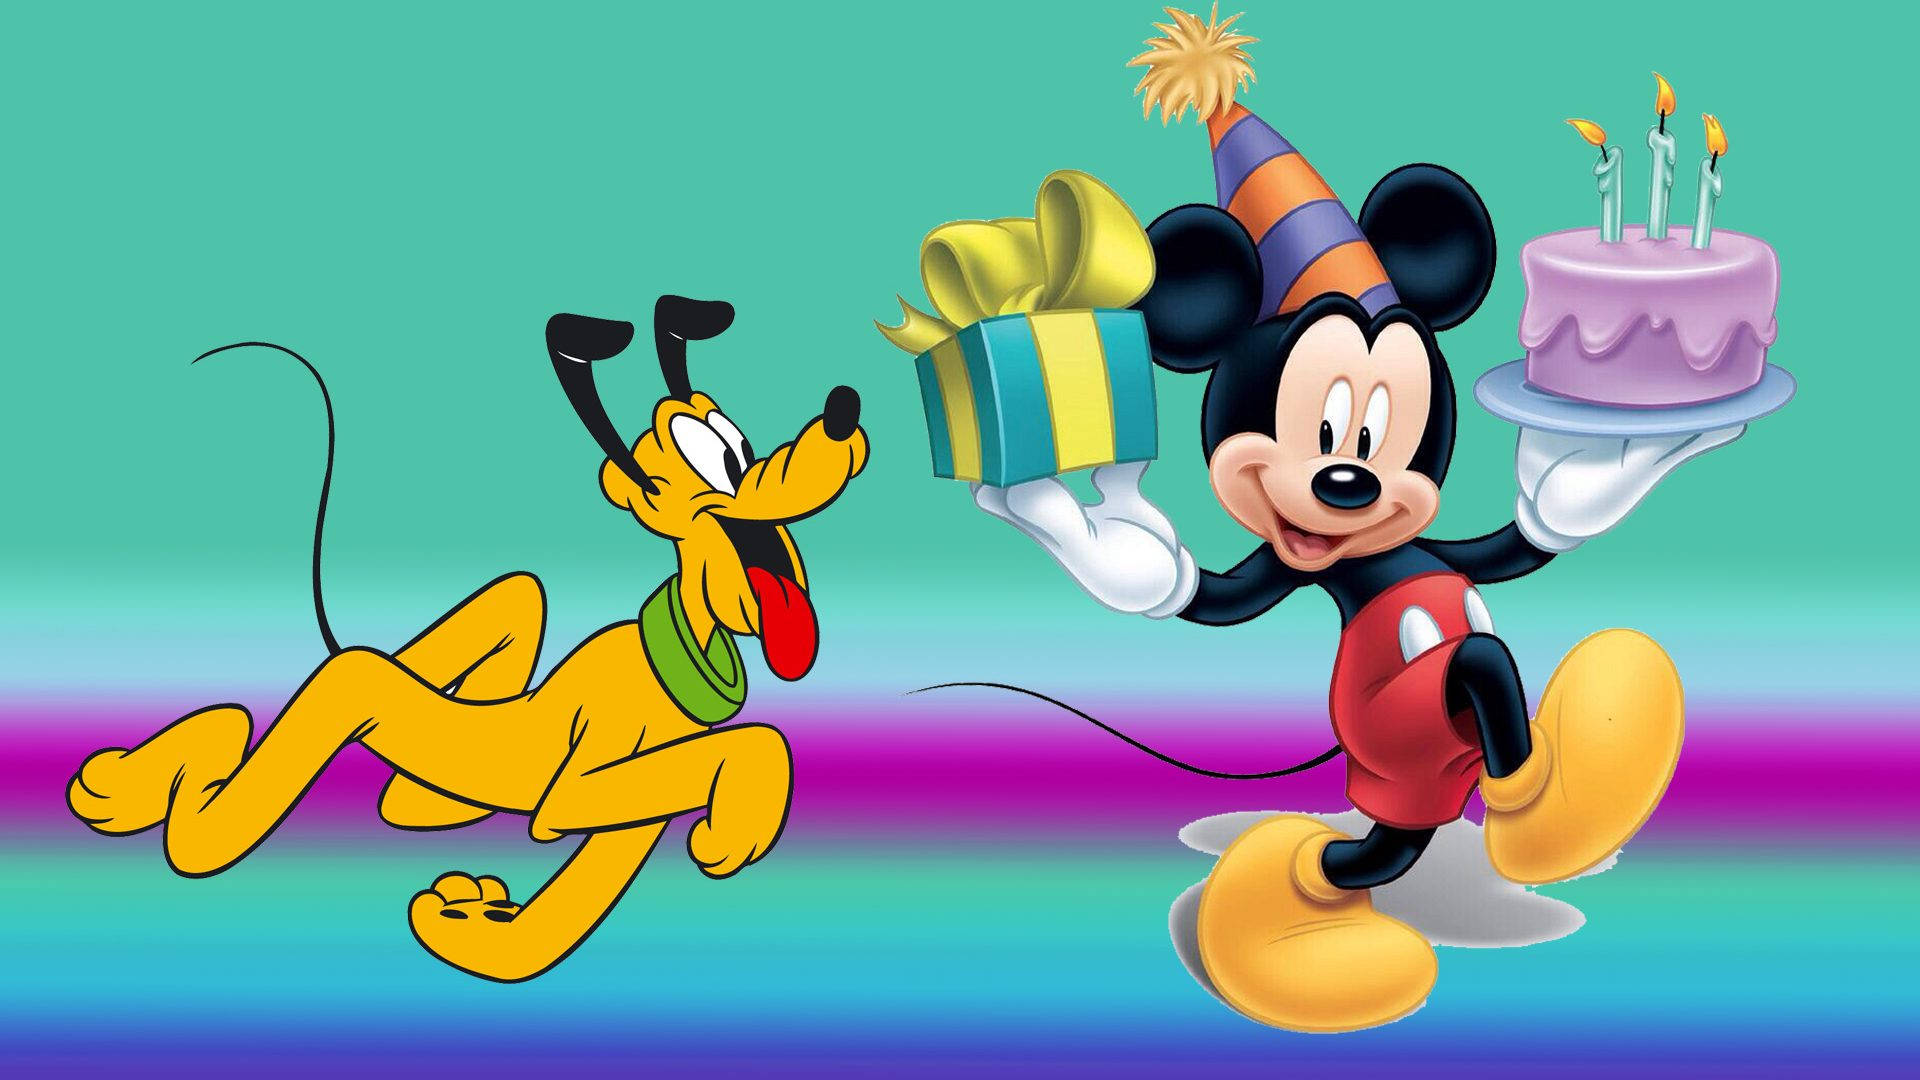 Disney Pluto And Mickey Mouse Wallpaper